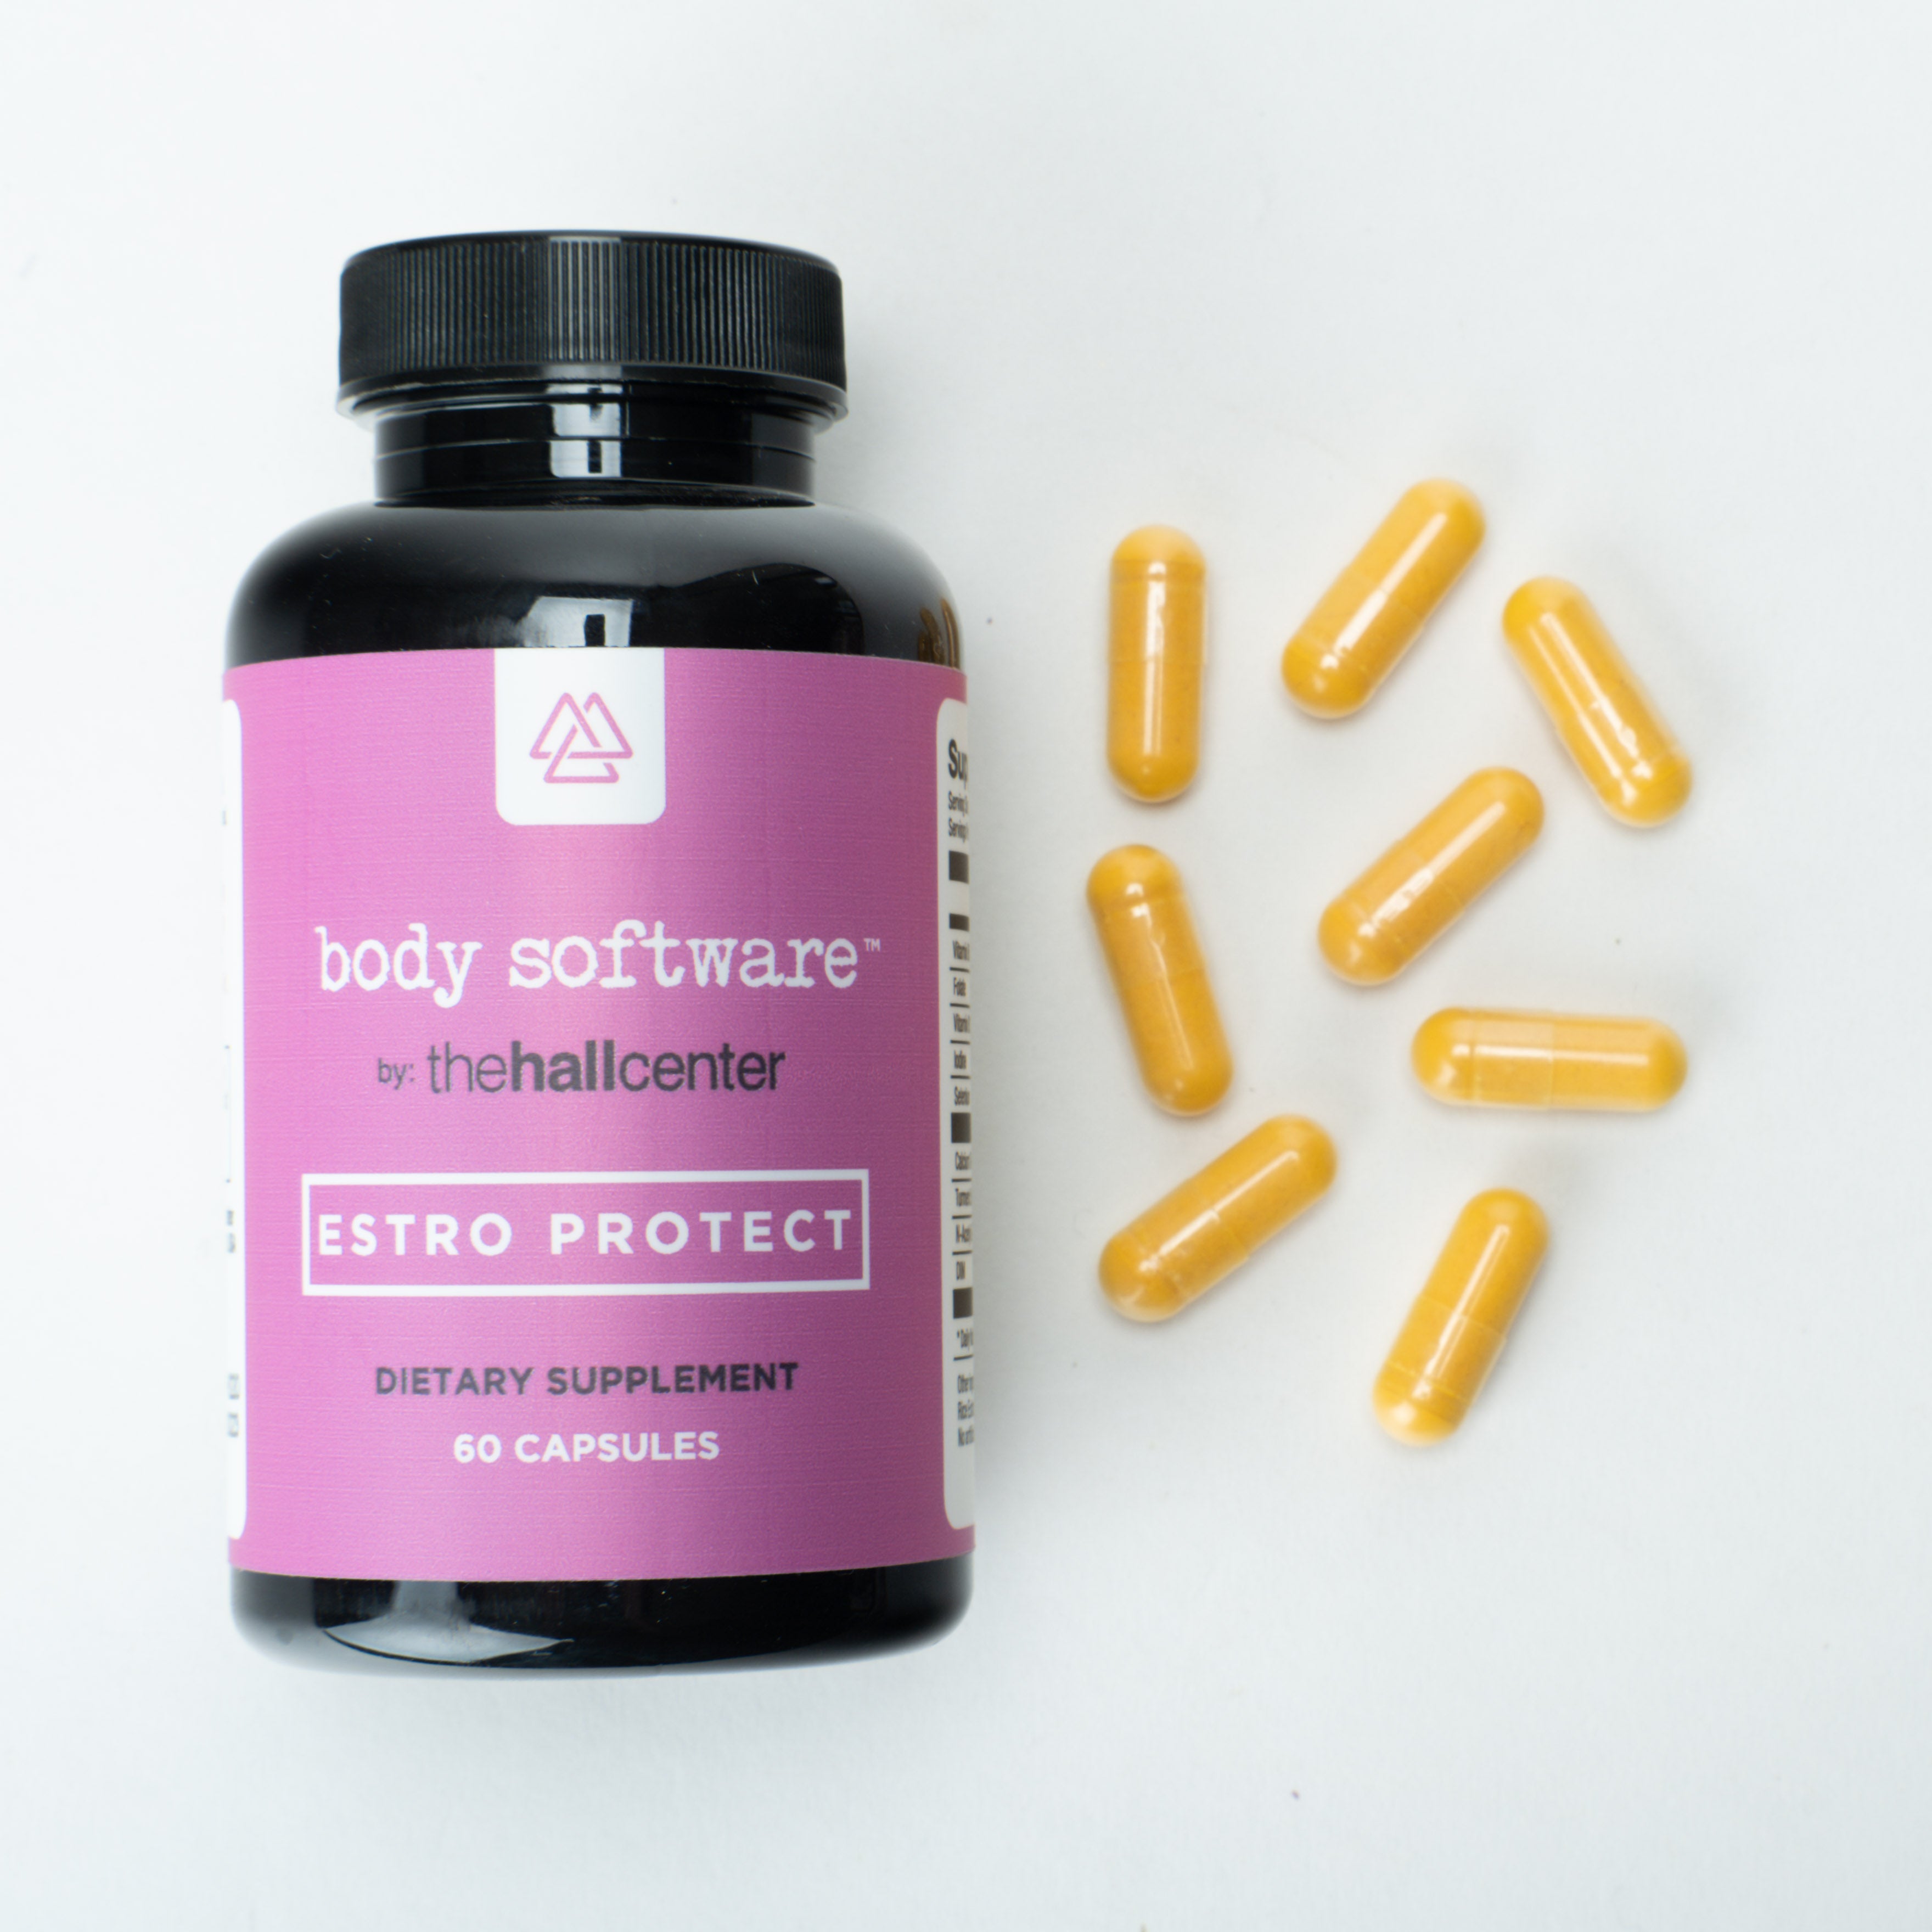 Estro Protect by Body Software